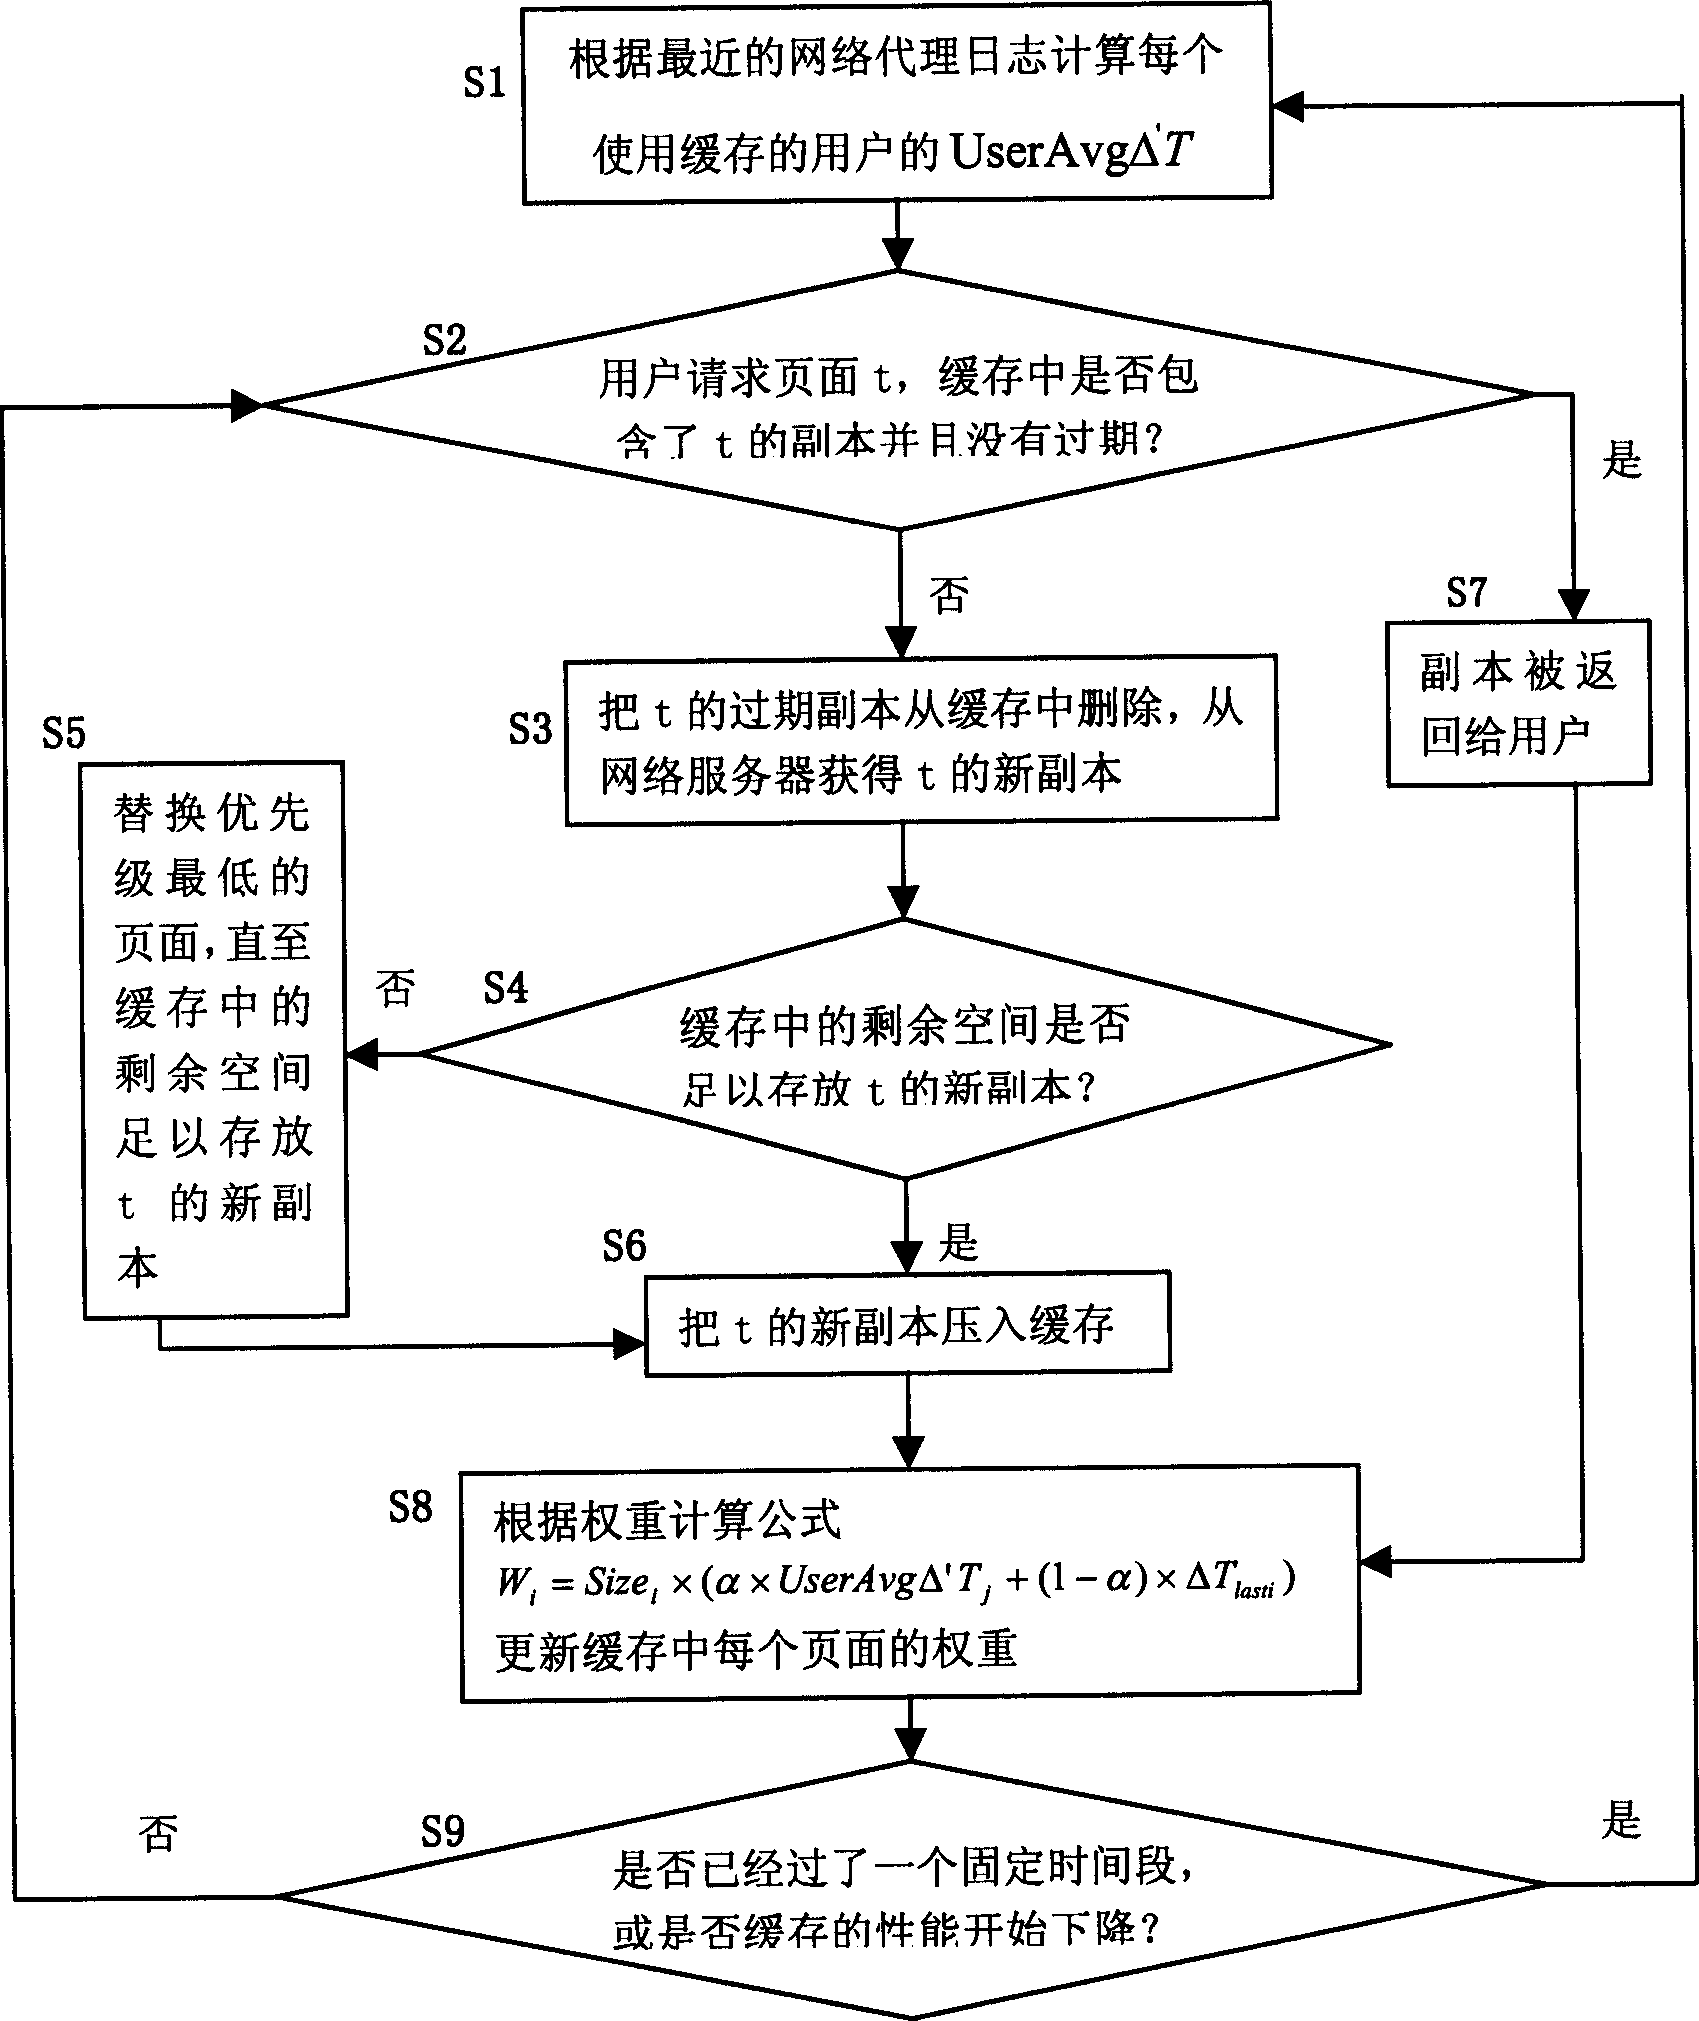 Network agent buffer substitution by using access characteristics of network users